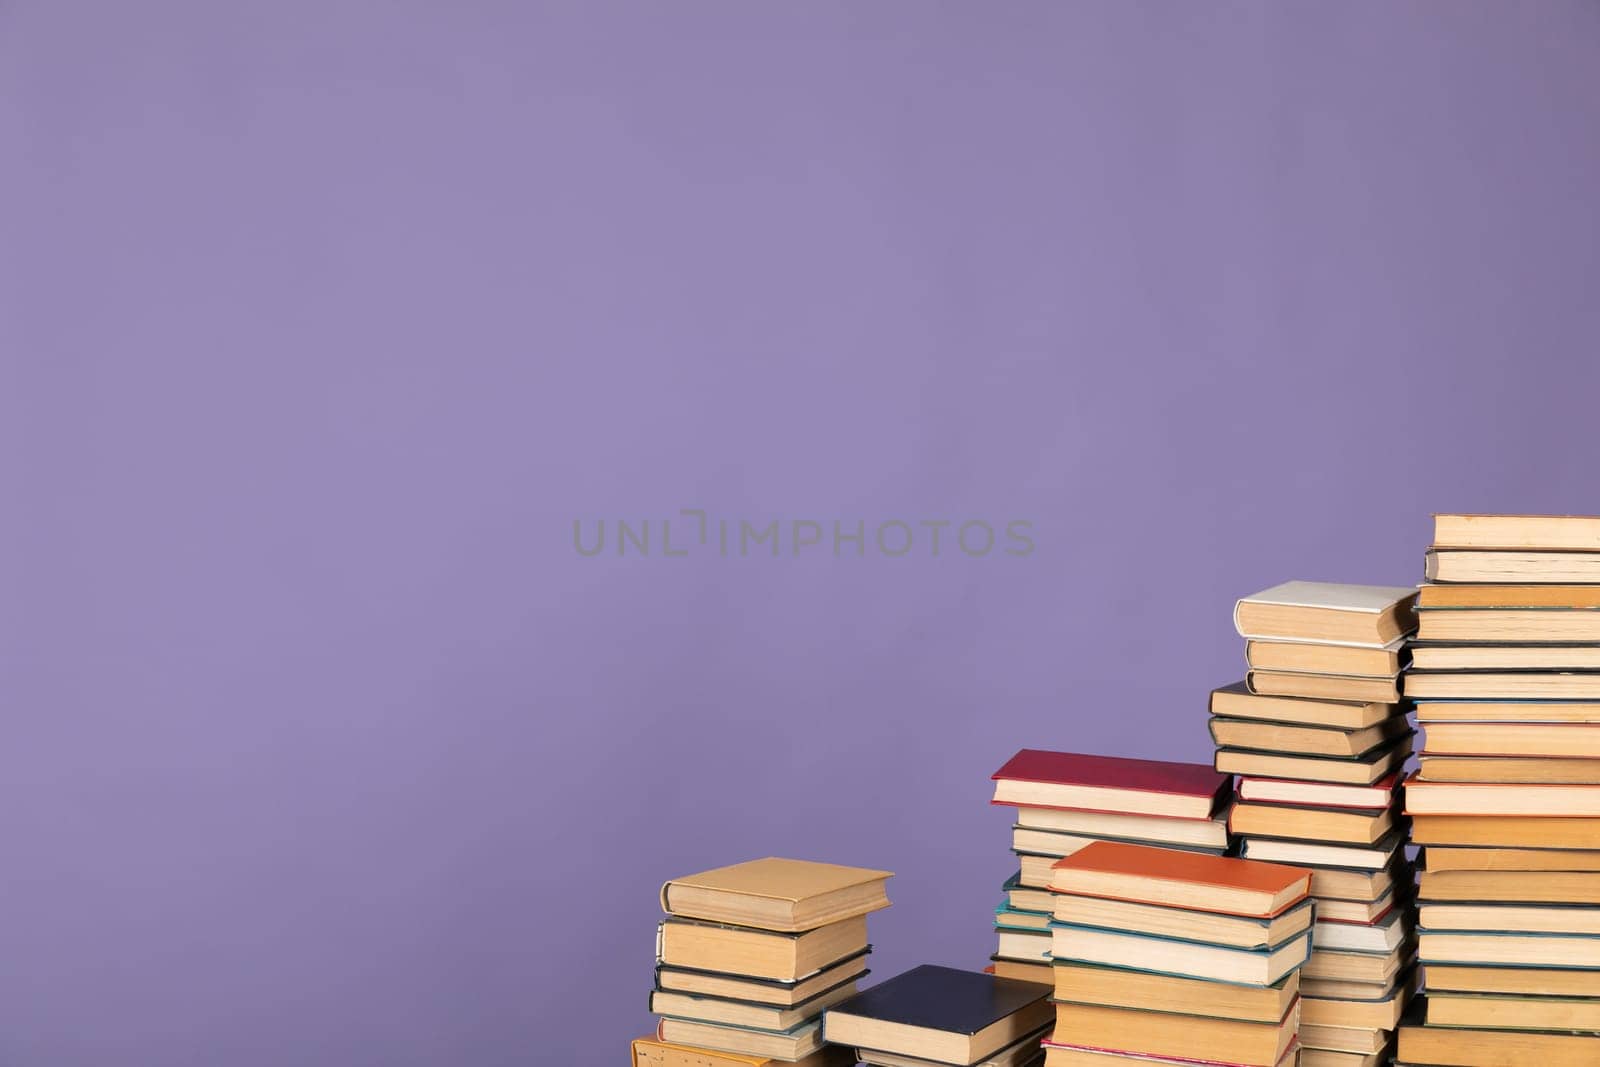 stacks of books scientific literature of knowledge in the library on purple background